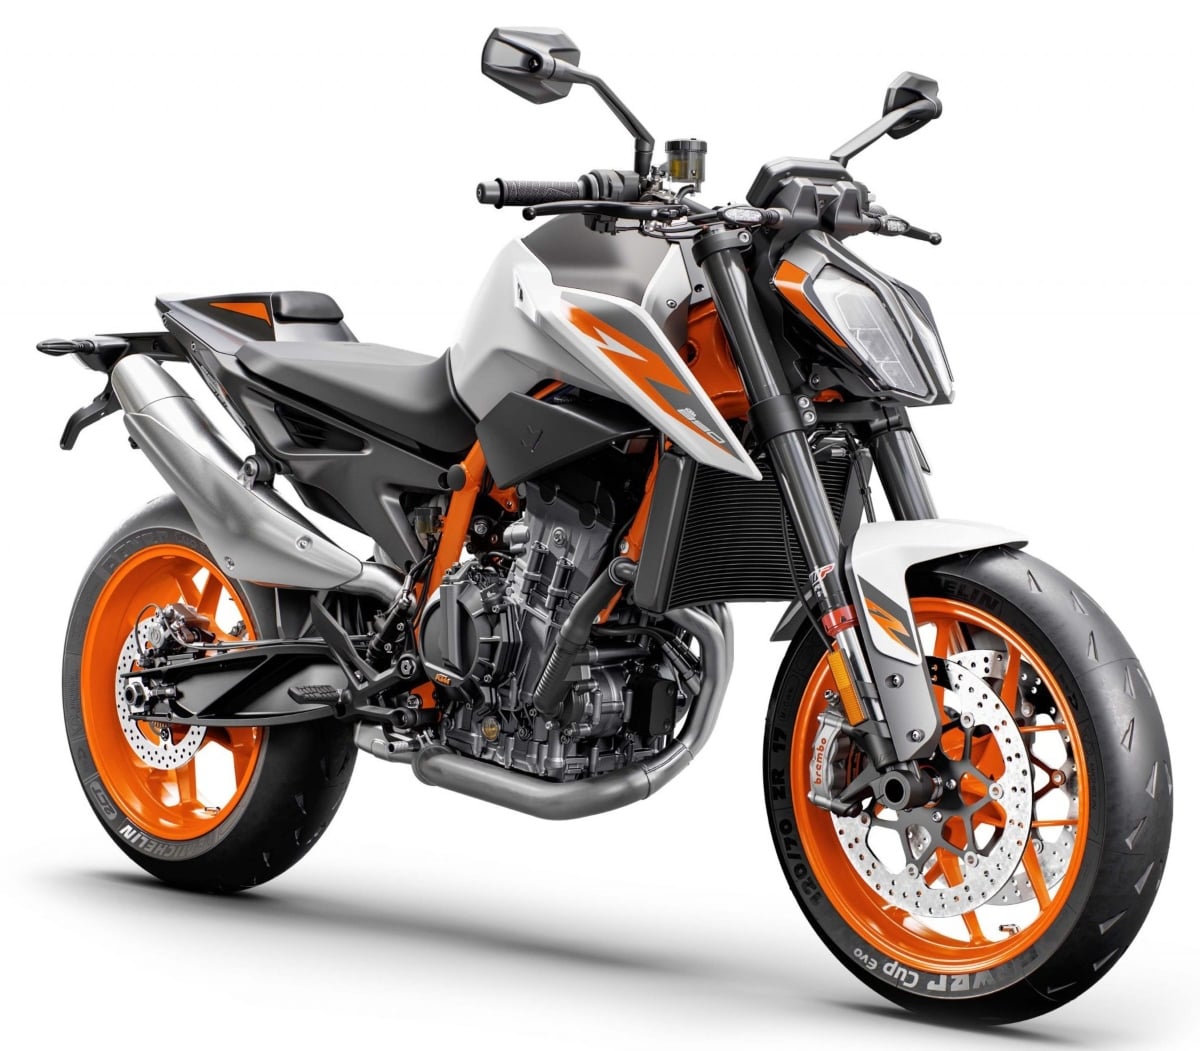 The KTM Duke 890 R Might Just Be Headed on its Way to India